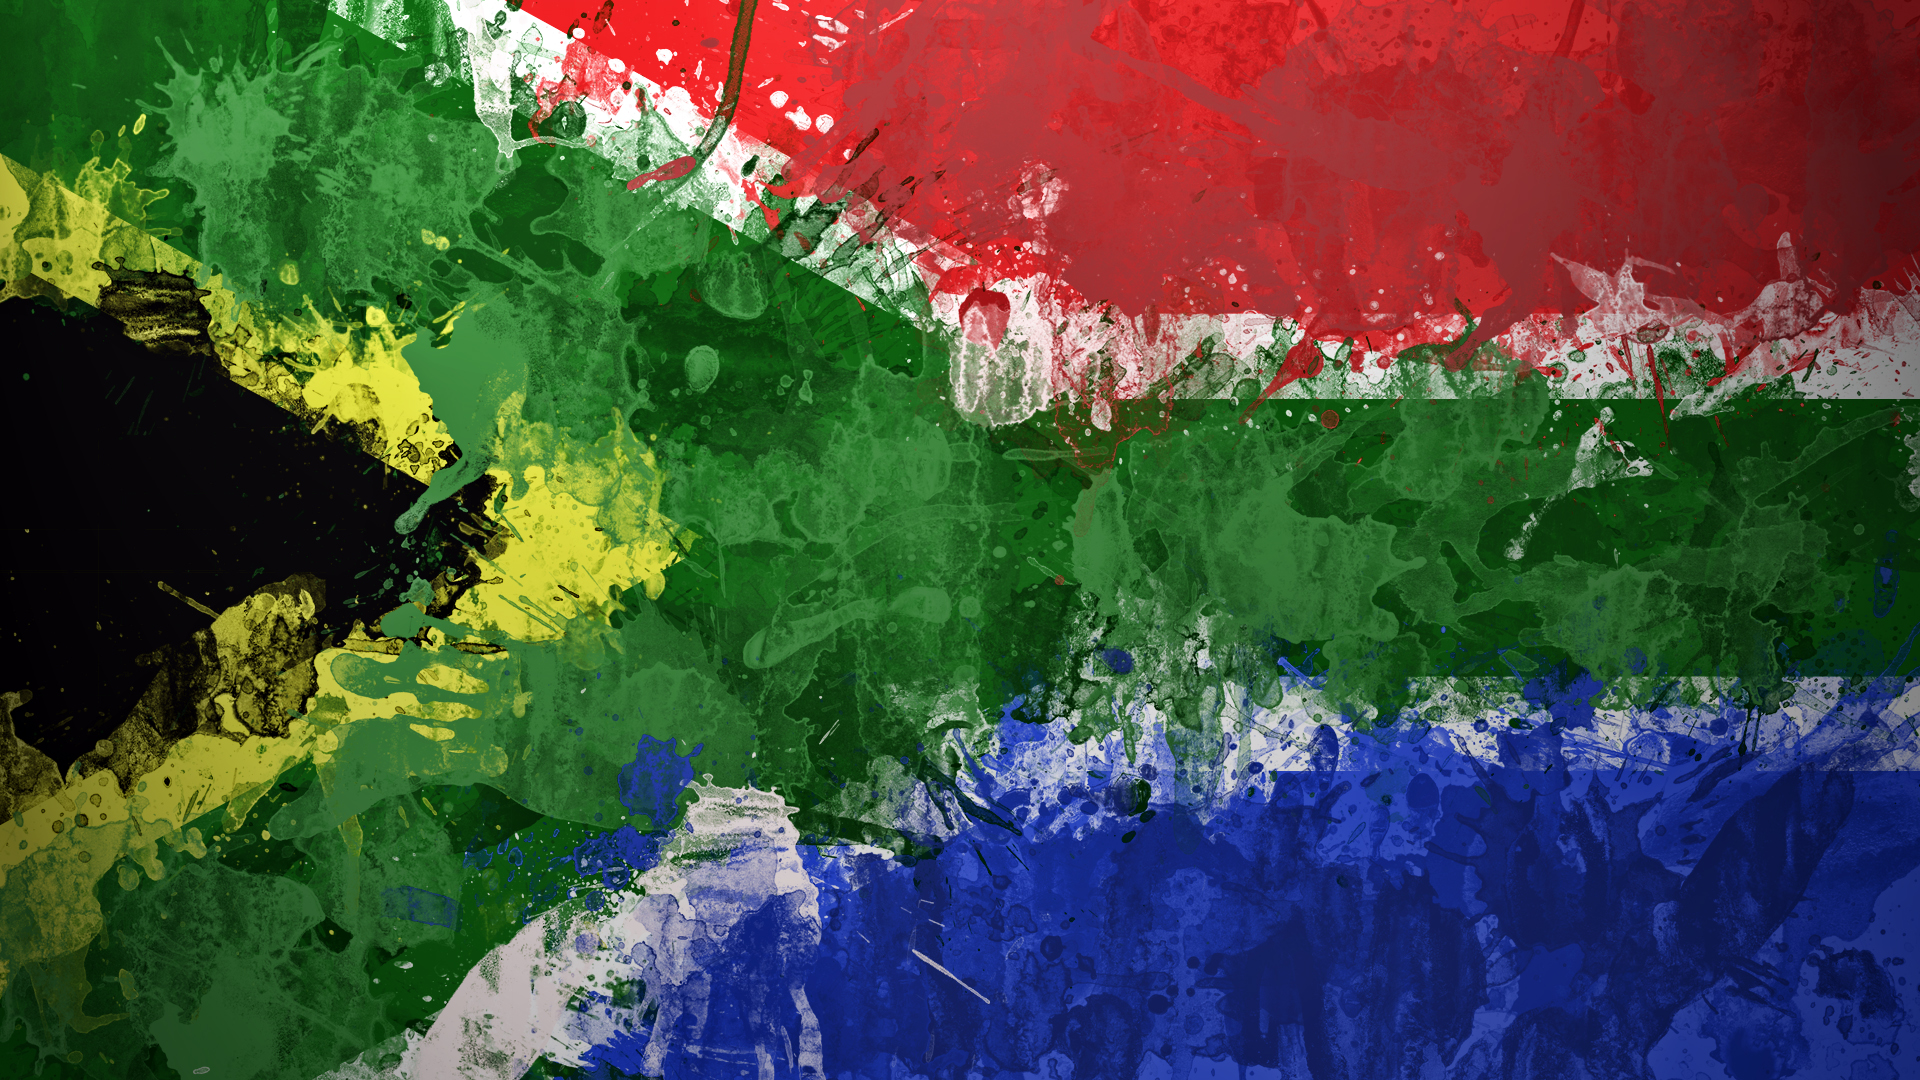 South African Flag Wallpaper